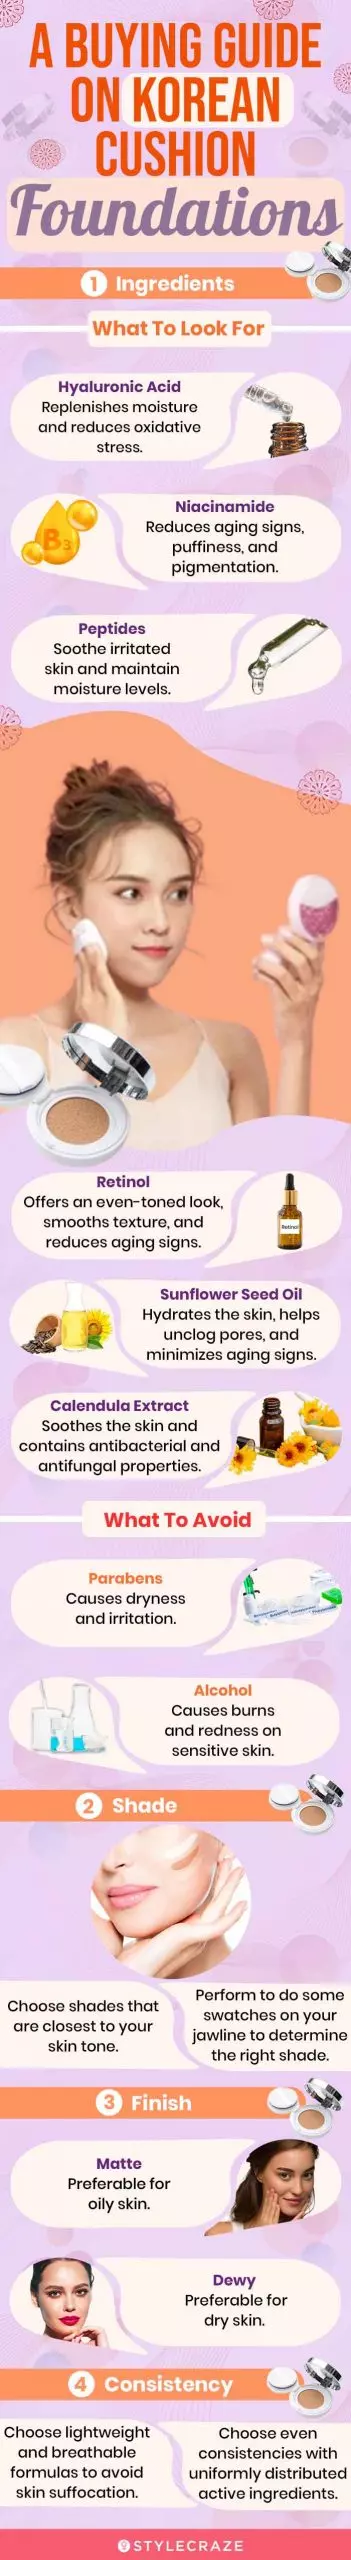 A Buying Guide On Korean Cushion Foundations (infographic)